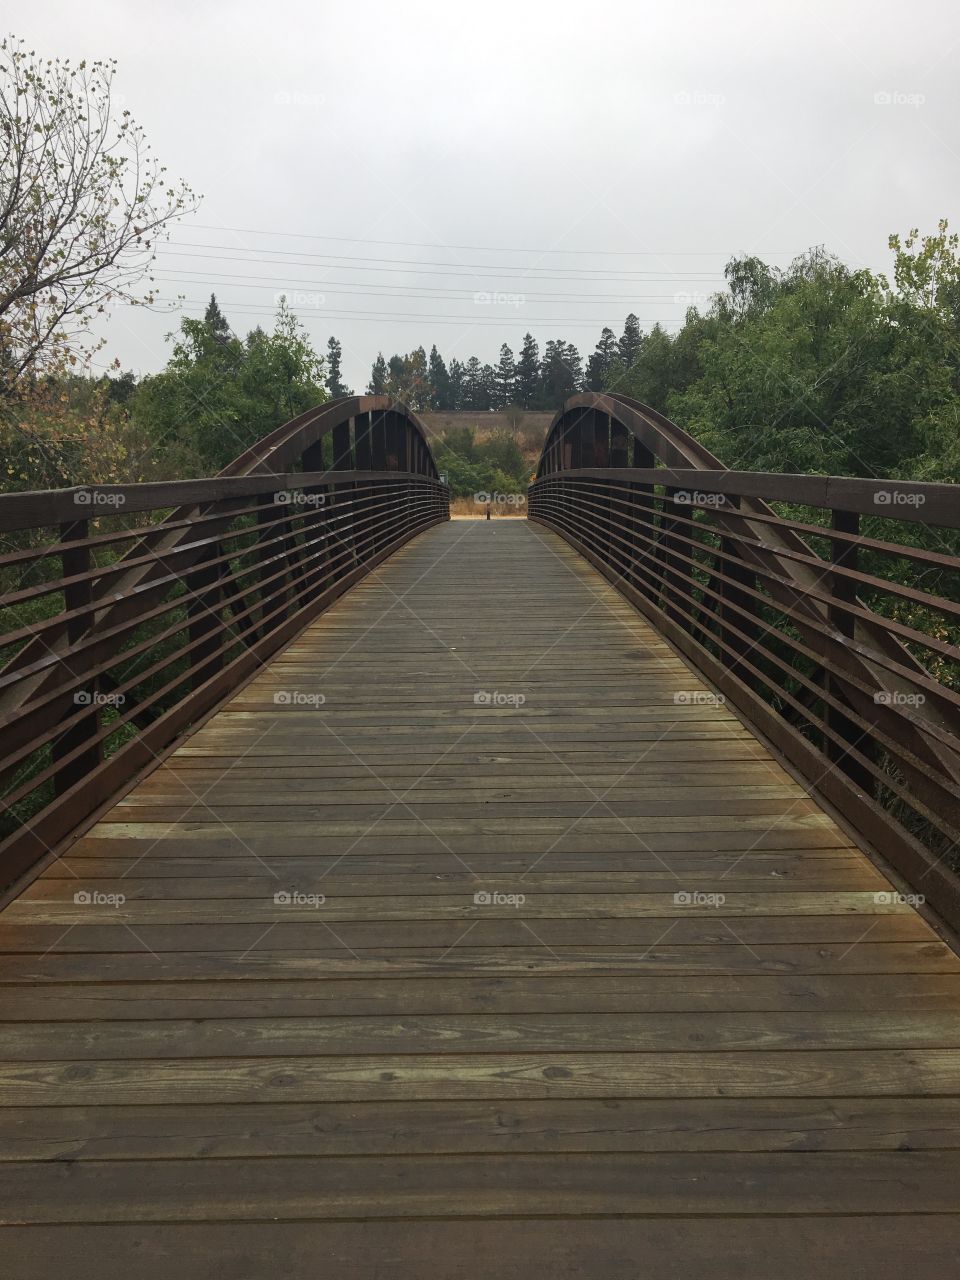 Morning gray clouds and an old brown wooden bridge